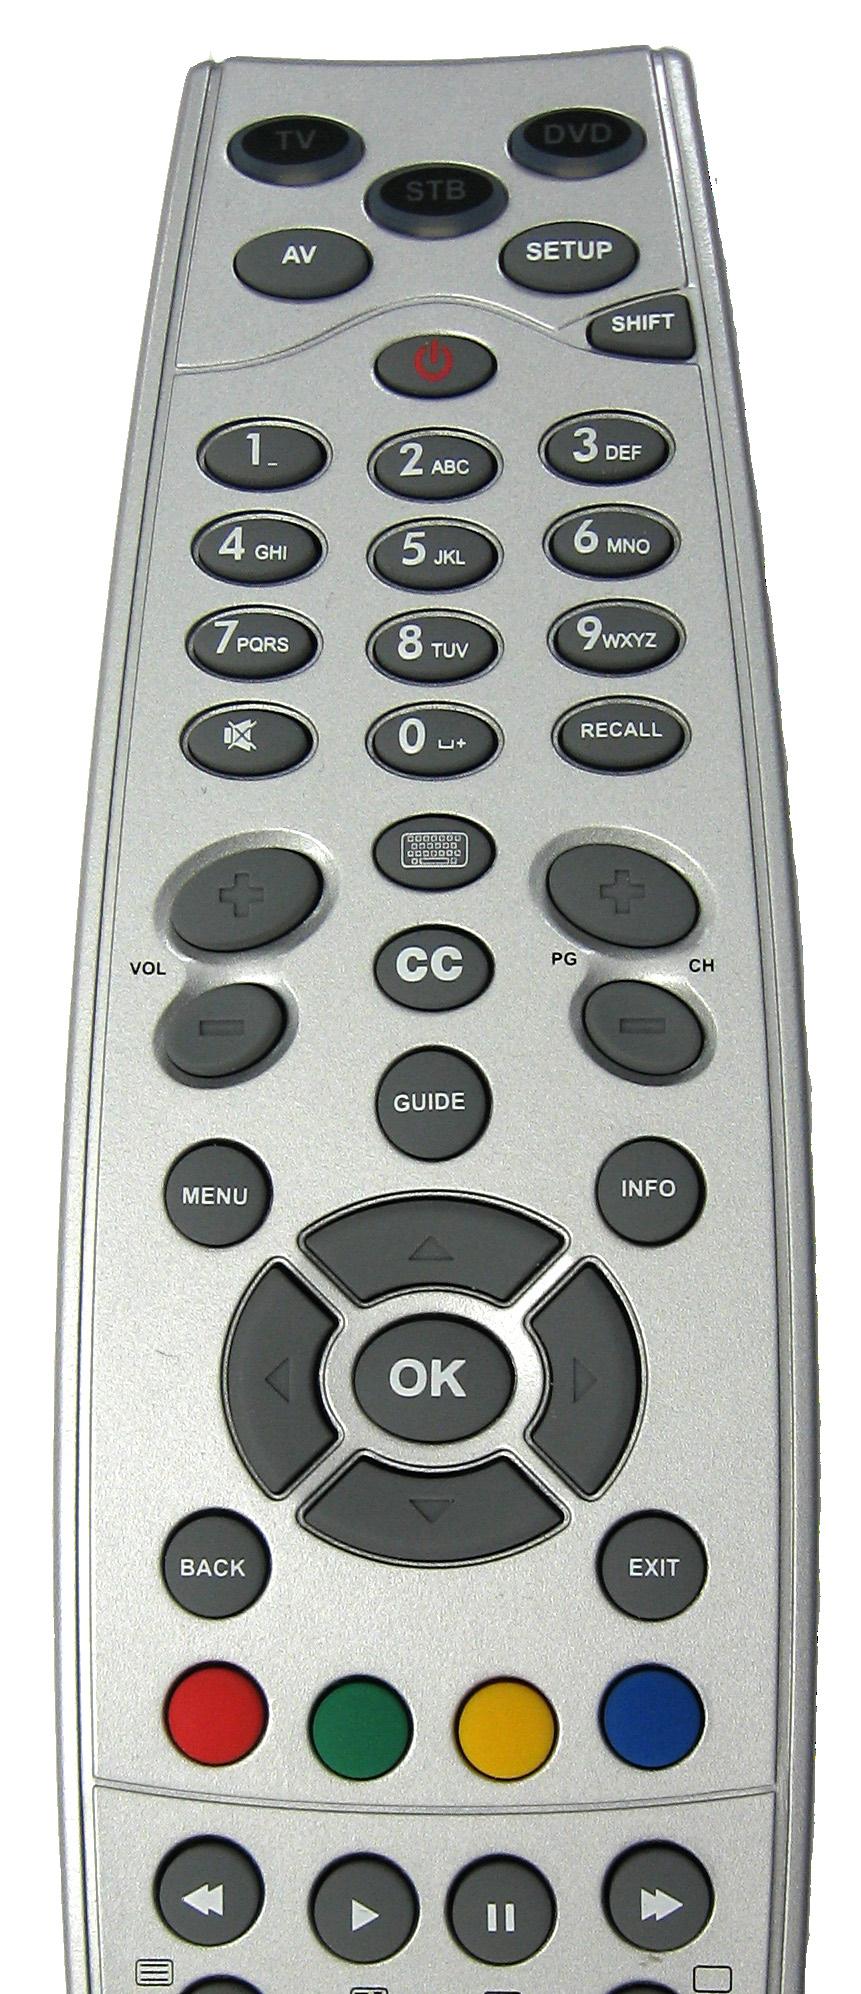 Remote Control Basics To control your set-top box, press the STB (set-top box) button on your remote control. Every button you press afterwards will control your set-top box.